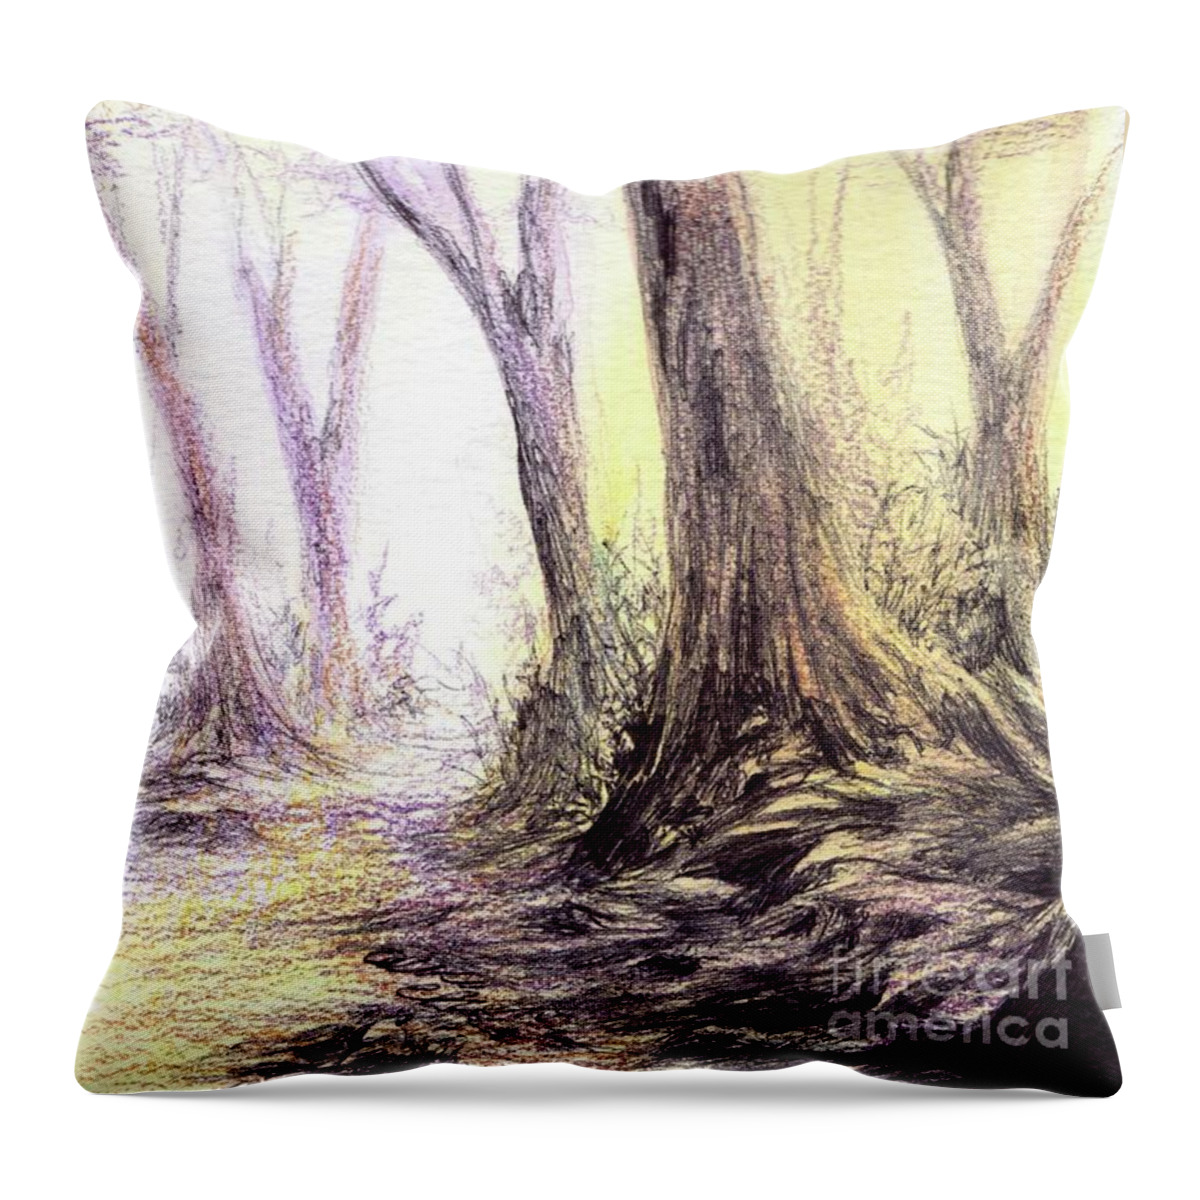 Golden Throw Pillow featuring the drawing Golden by Alice Chen